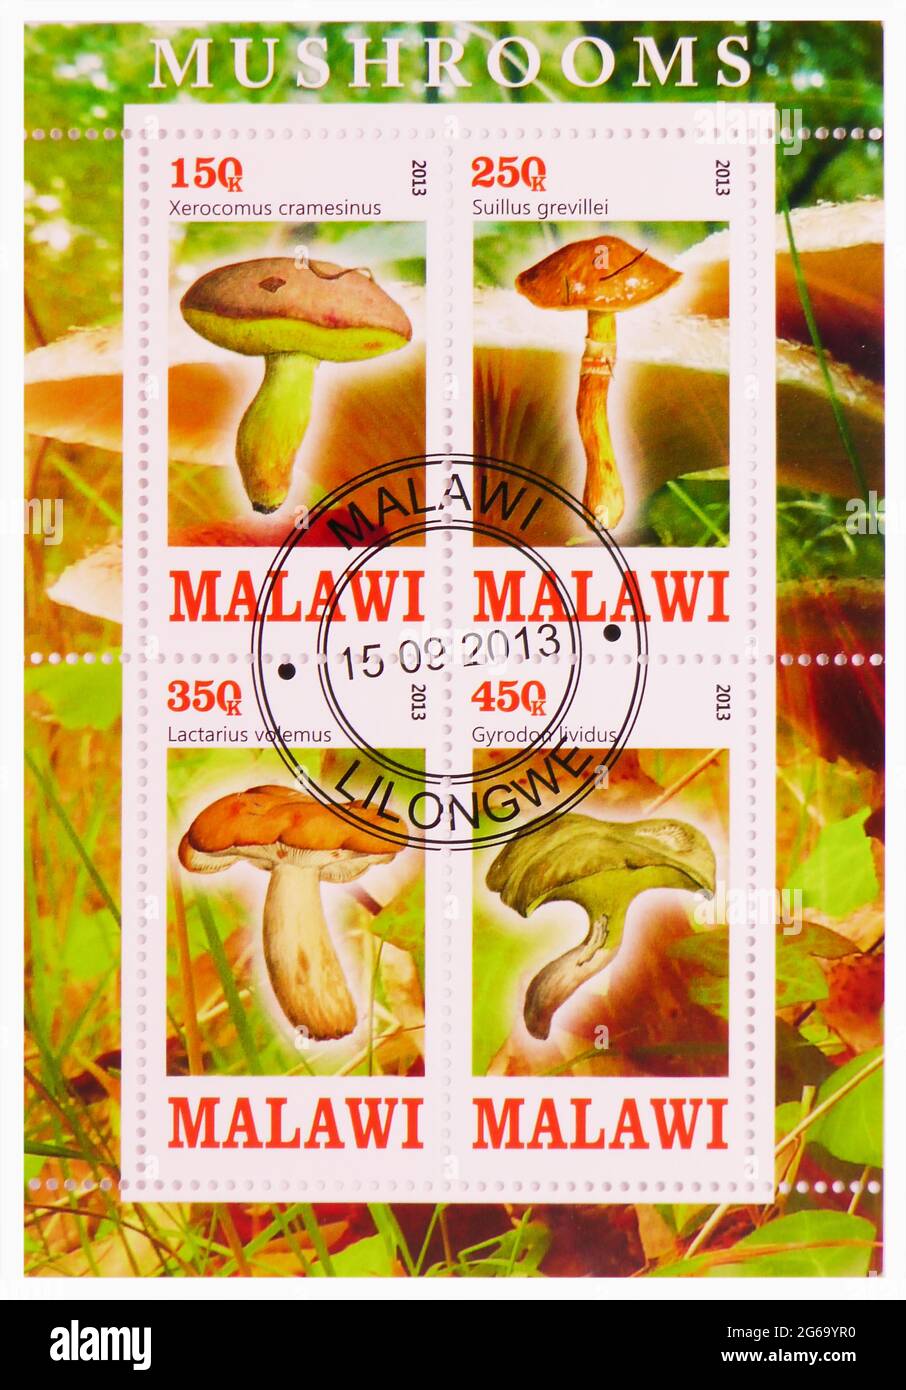 MOSCOW, RUSSIA - MARCH 28, 2020: Four postage stamps printed in Malawi shows , Mushrooms serie, circa 2013 Stock Photo